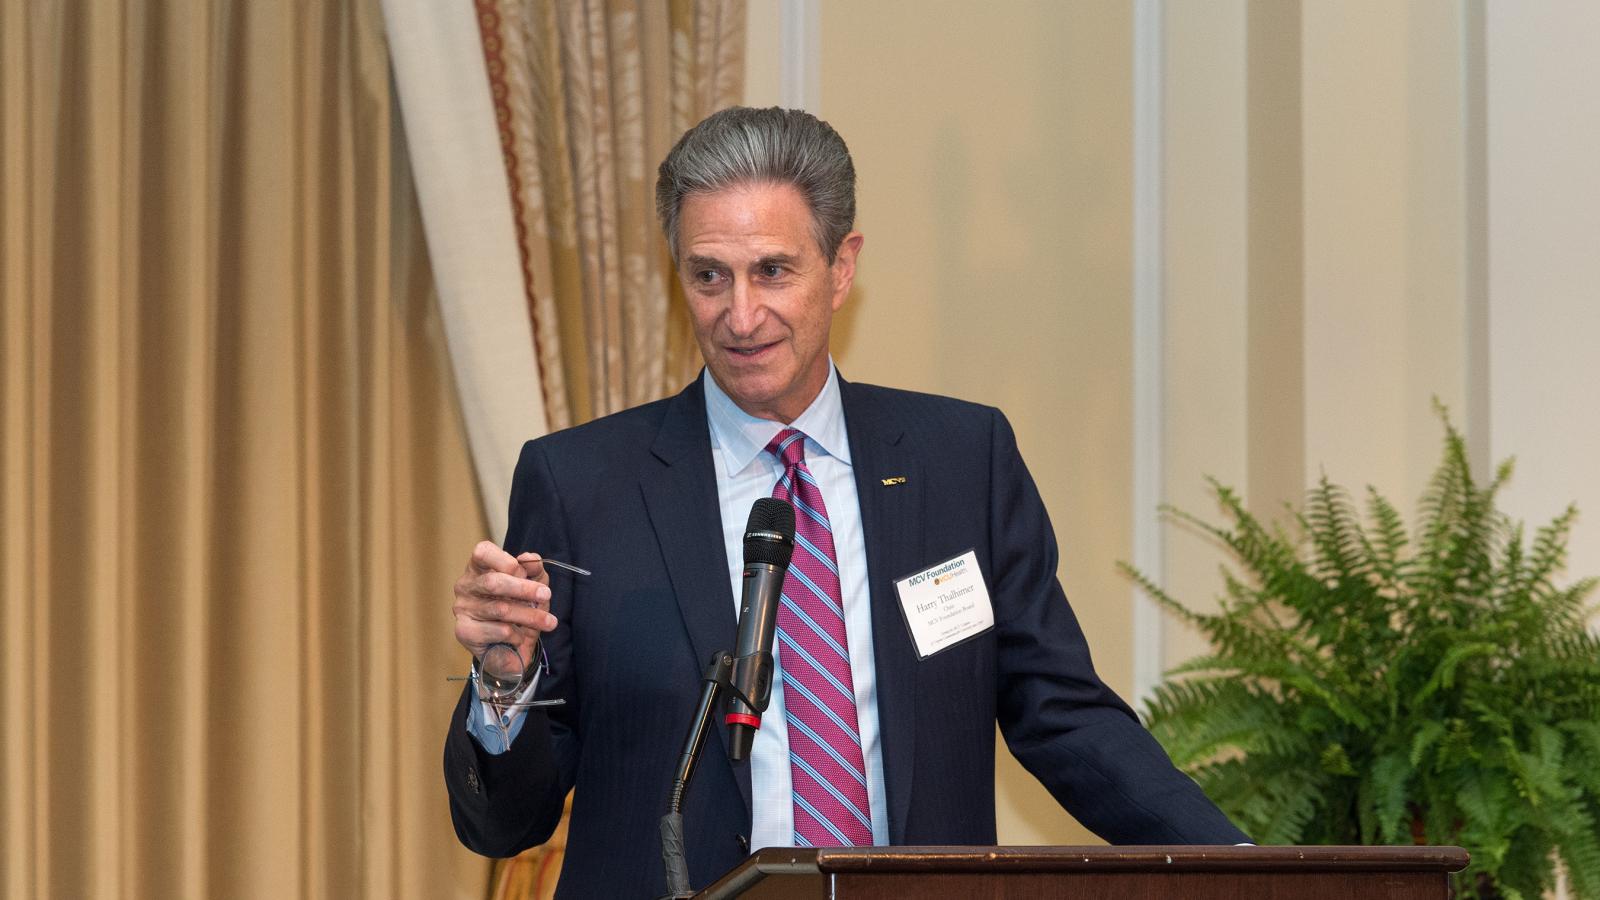 Harry Thalhimer, past chair of the MCV Foundation Board of Trustees, addresses the board at the foundation’s annual dinner and awards ceremony in 2019. 